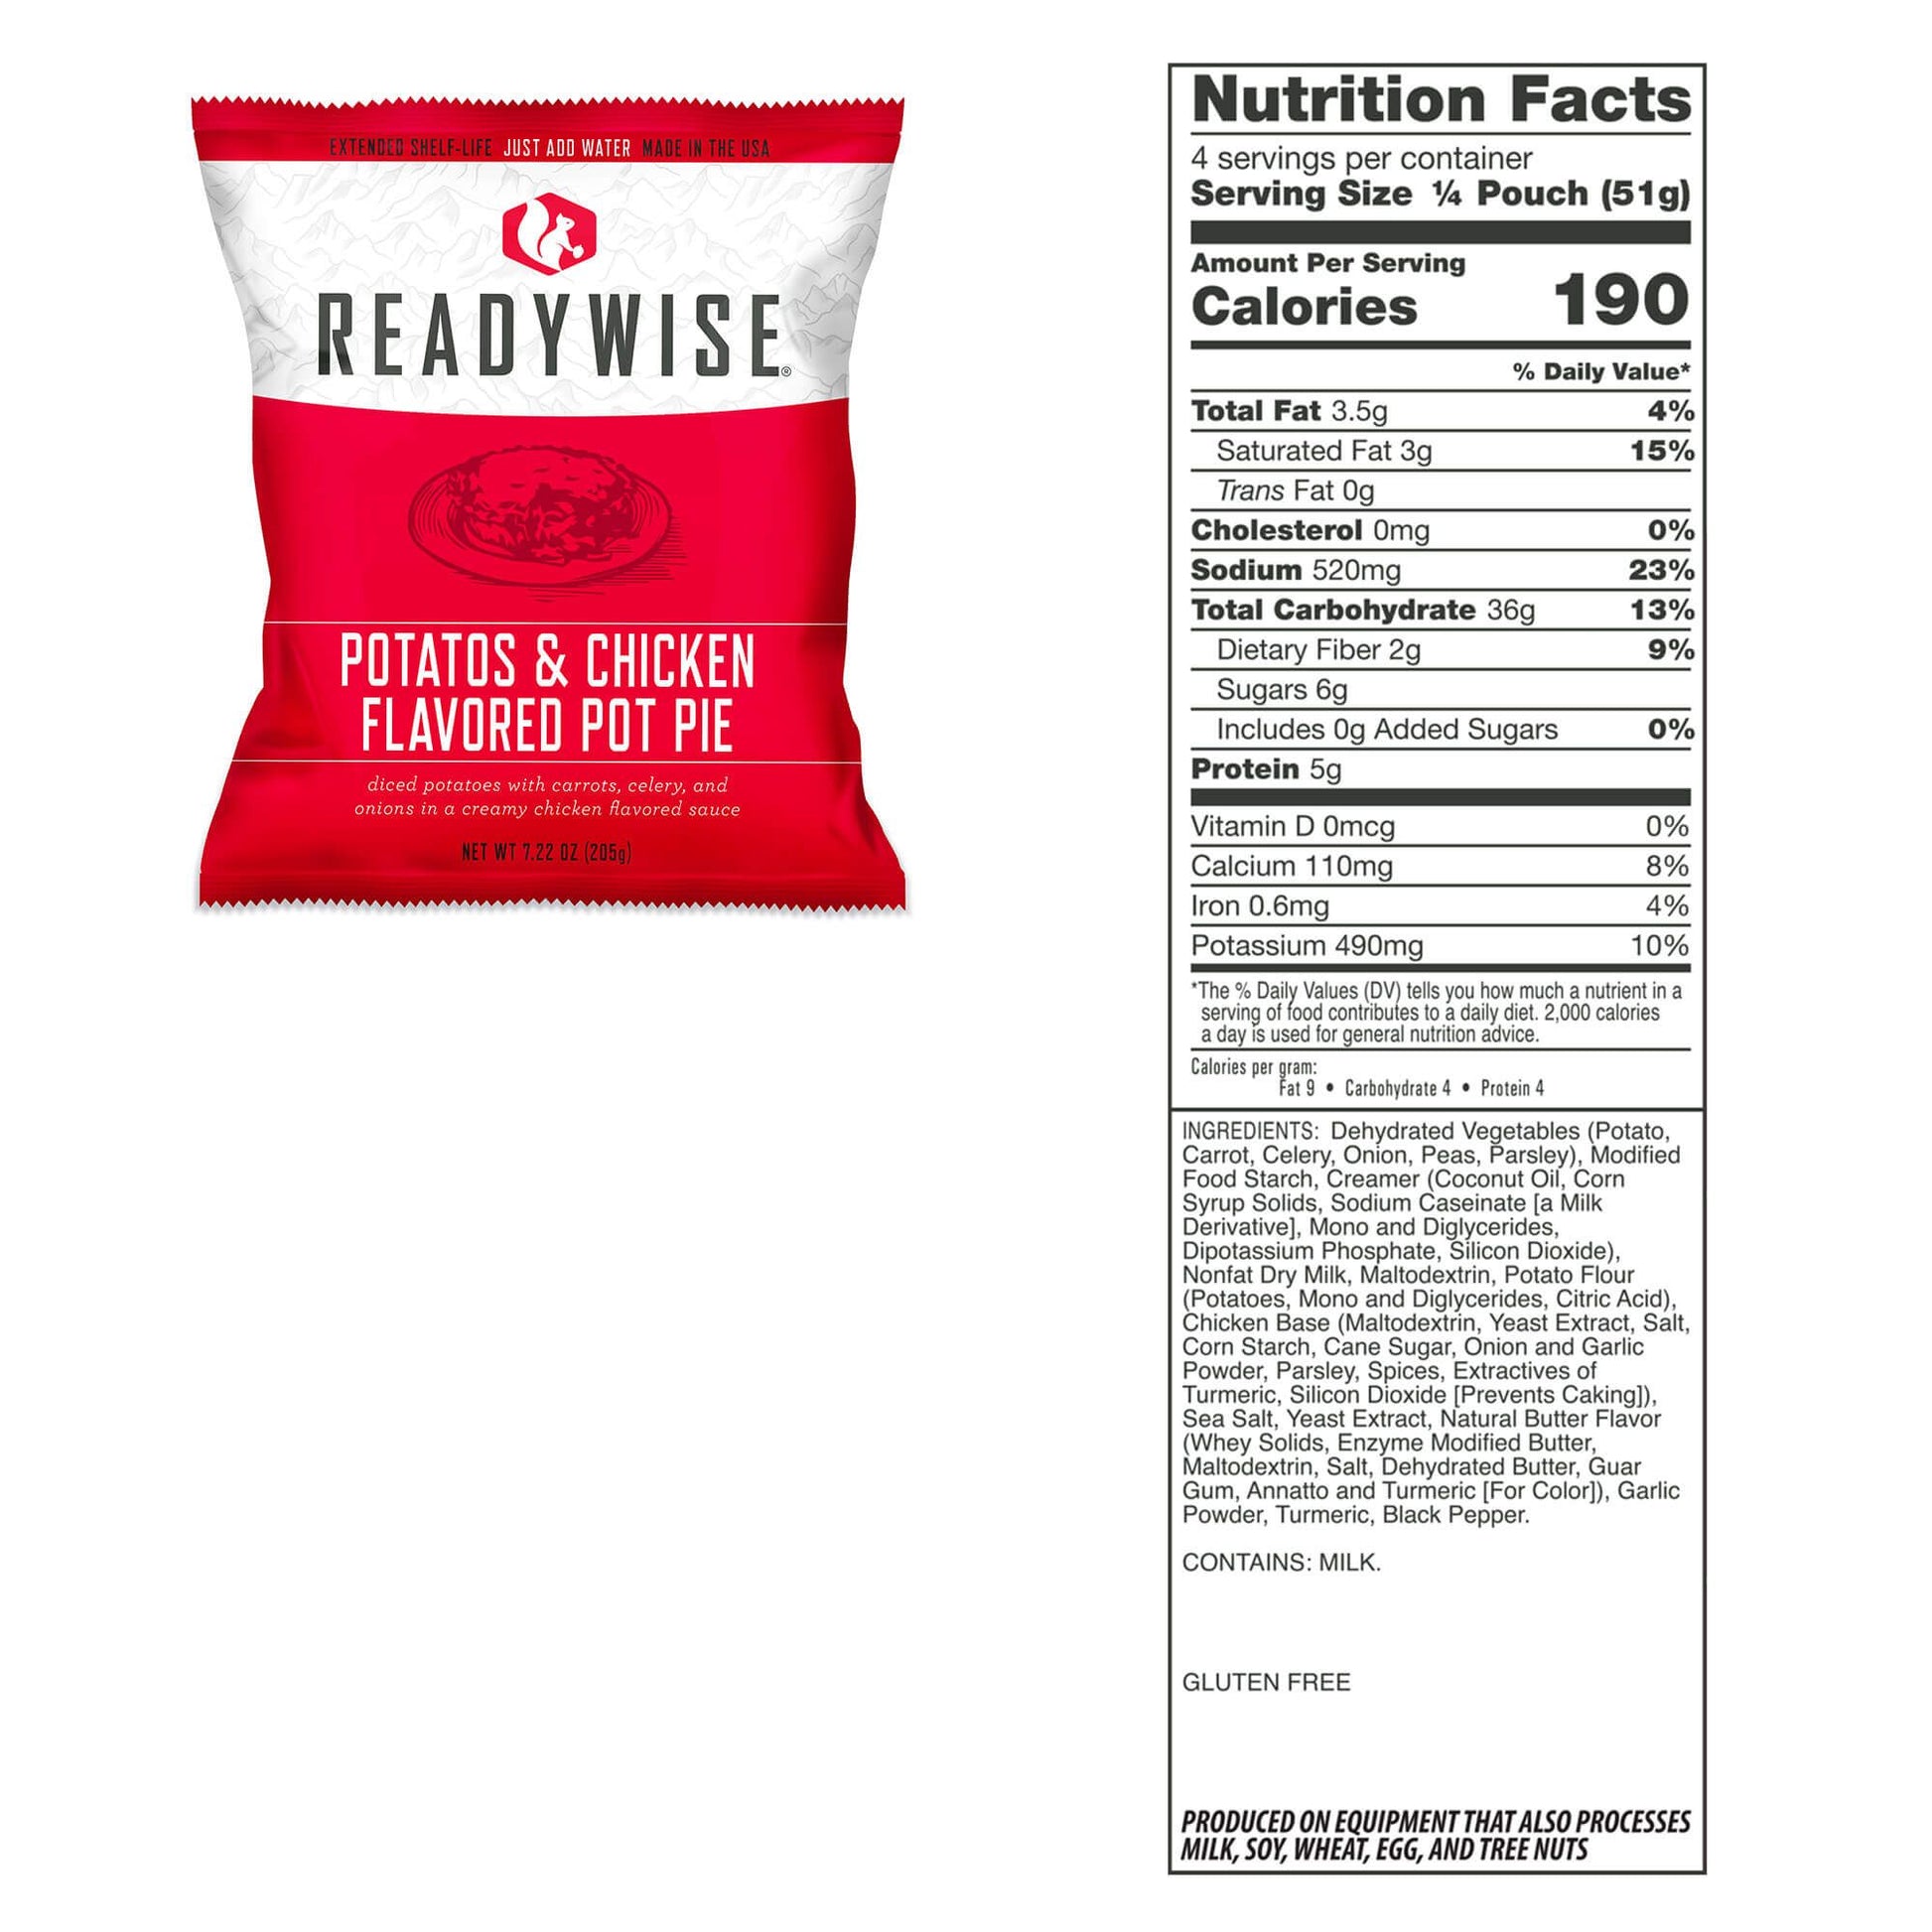 Potatoes & Chicken Flavored Pot Pie packet with nutritional information